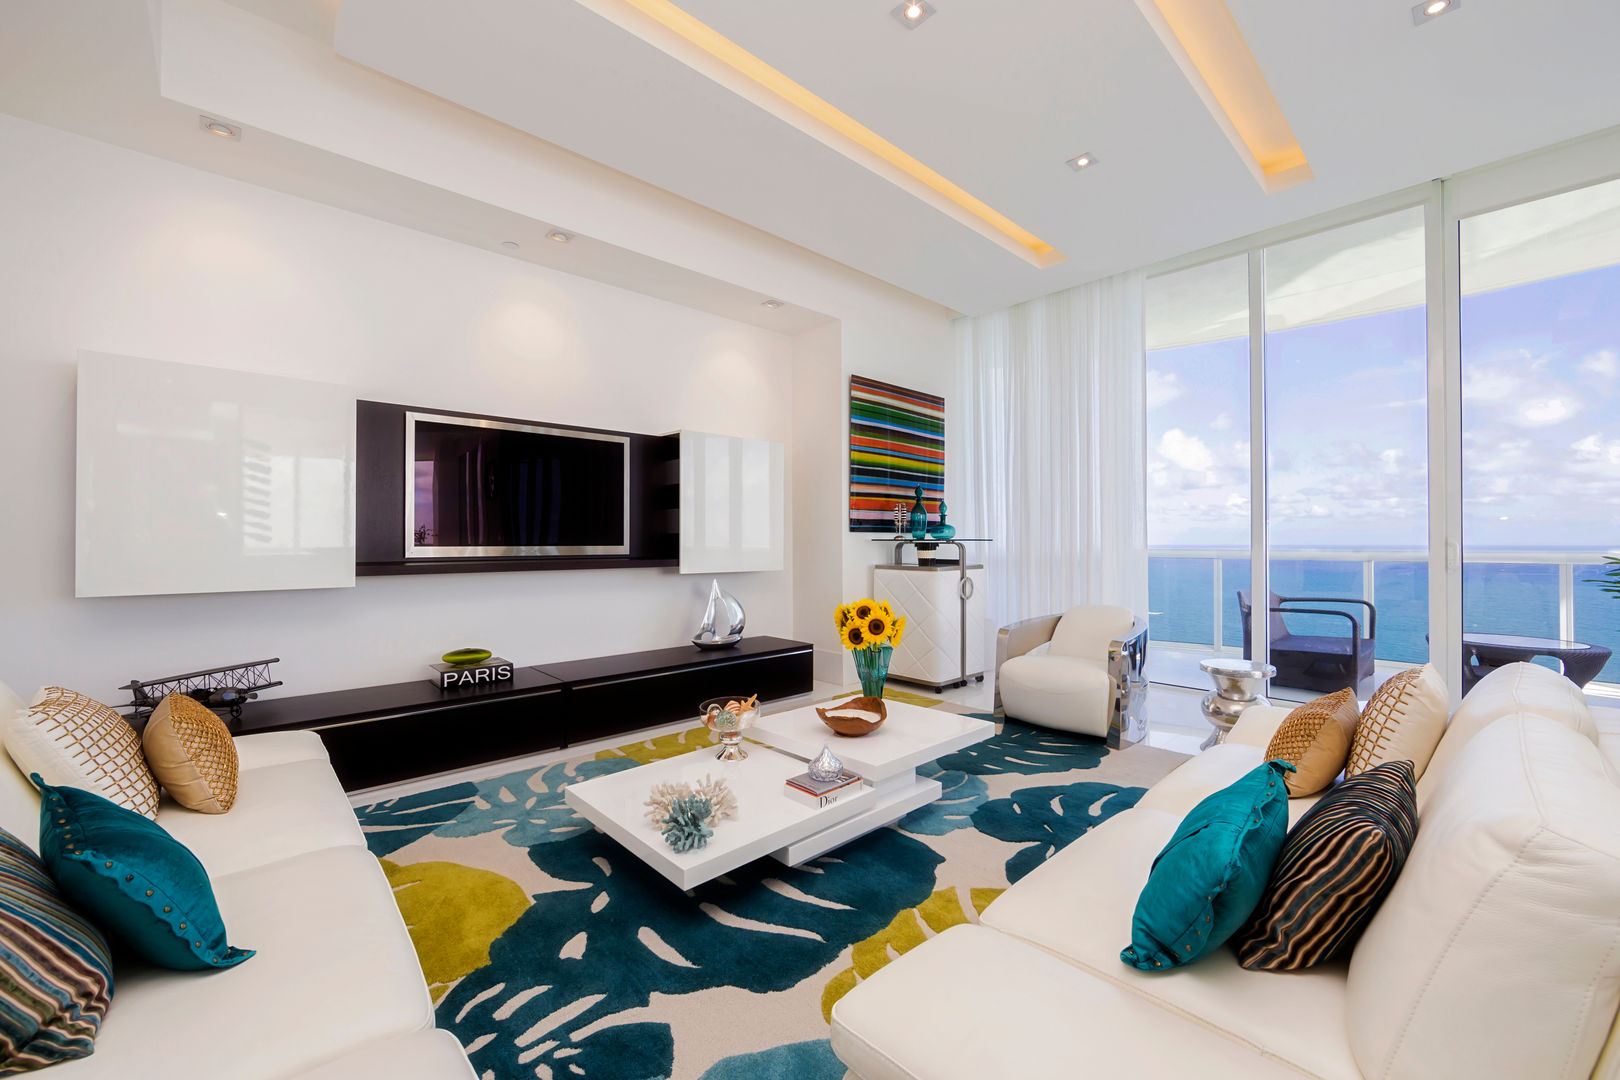 Sunny Isles - Florida - US, Infinity Spaces Infinity Spaces Living room